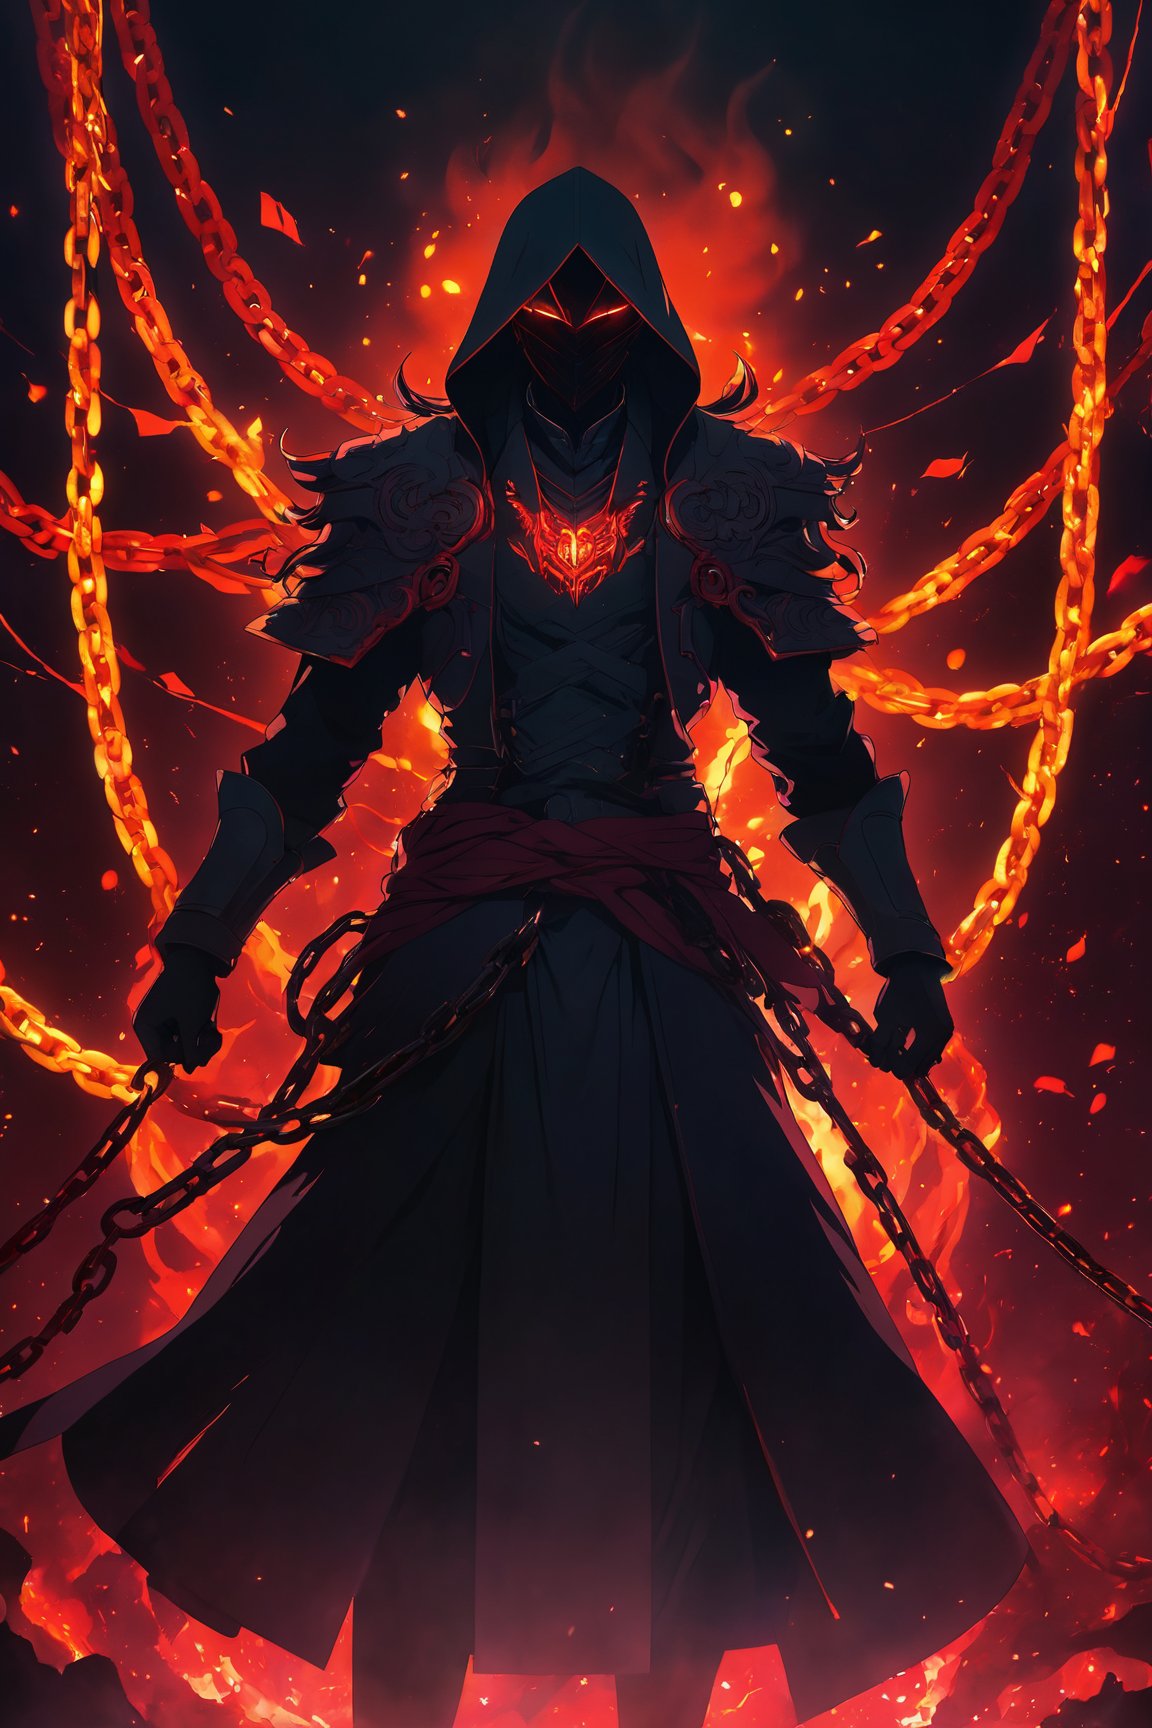 (Anime-style:1.3), (Dark and intense:1.2), A striking anime character, shrouded in shadows and poised for battle, stands against a deep crimson background adorned with menacing chains. Glowing red hollow fire particles dance around the scene, creating an otherworldly ambiance. The unique pastel look adds an ethereal touch to this dramatic and visually intense composition.,NylaUsha